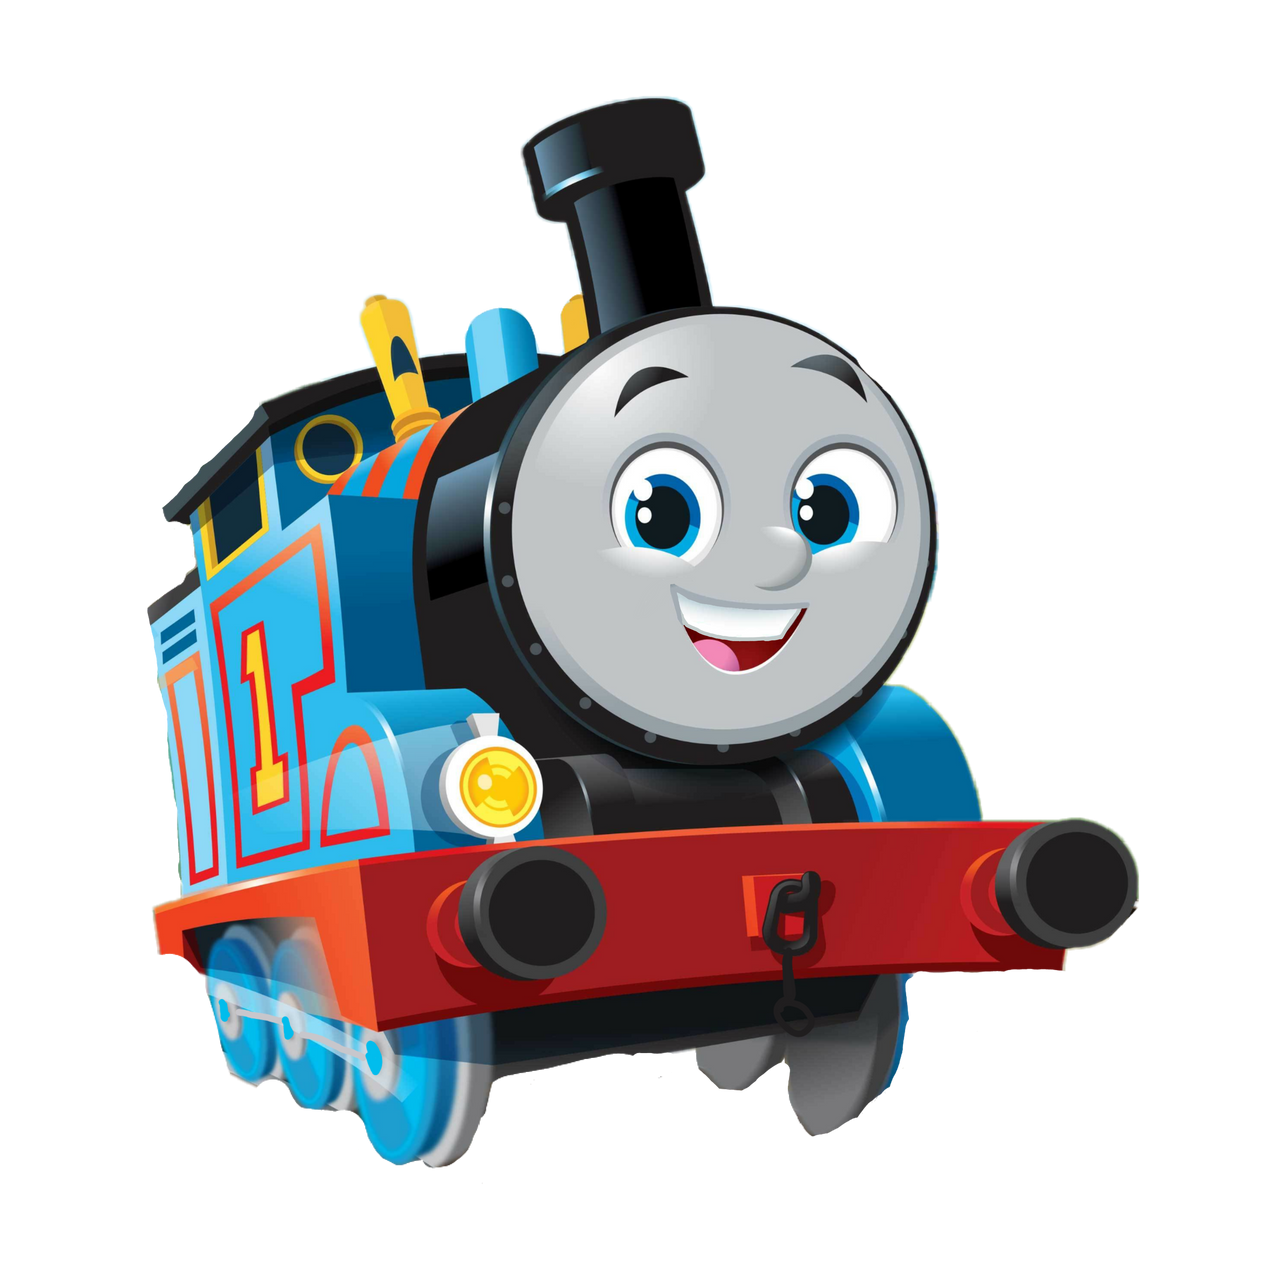 Thomas and Friends: All Engines Go - Thomas by Agustinsepulvedave on